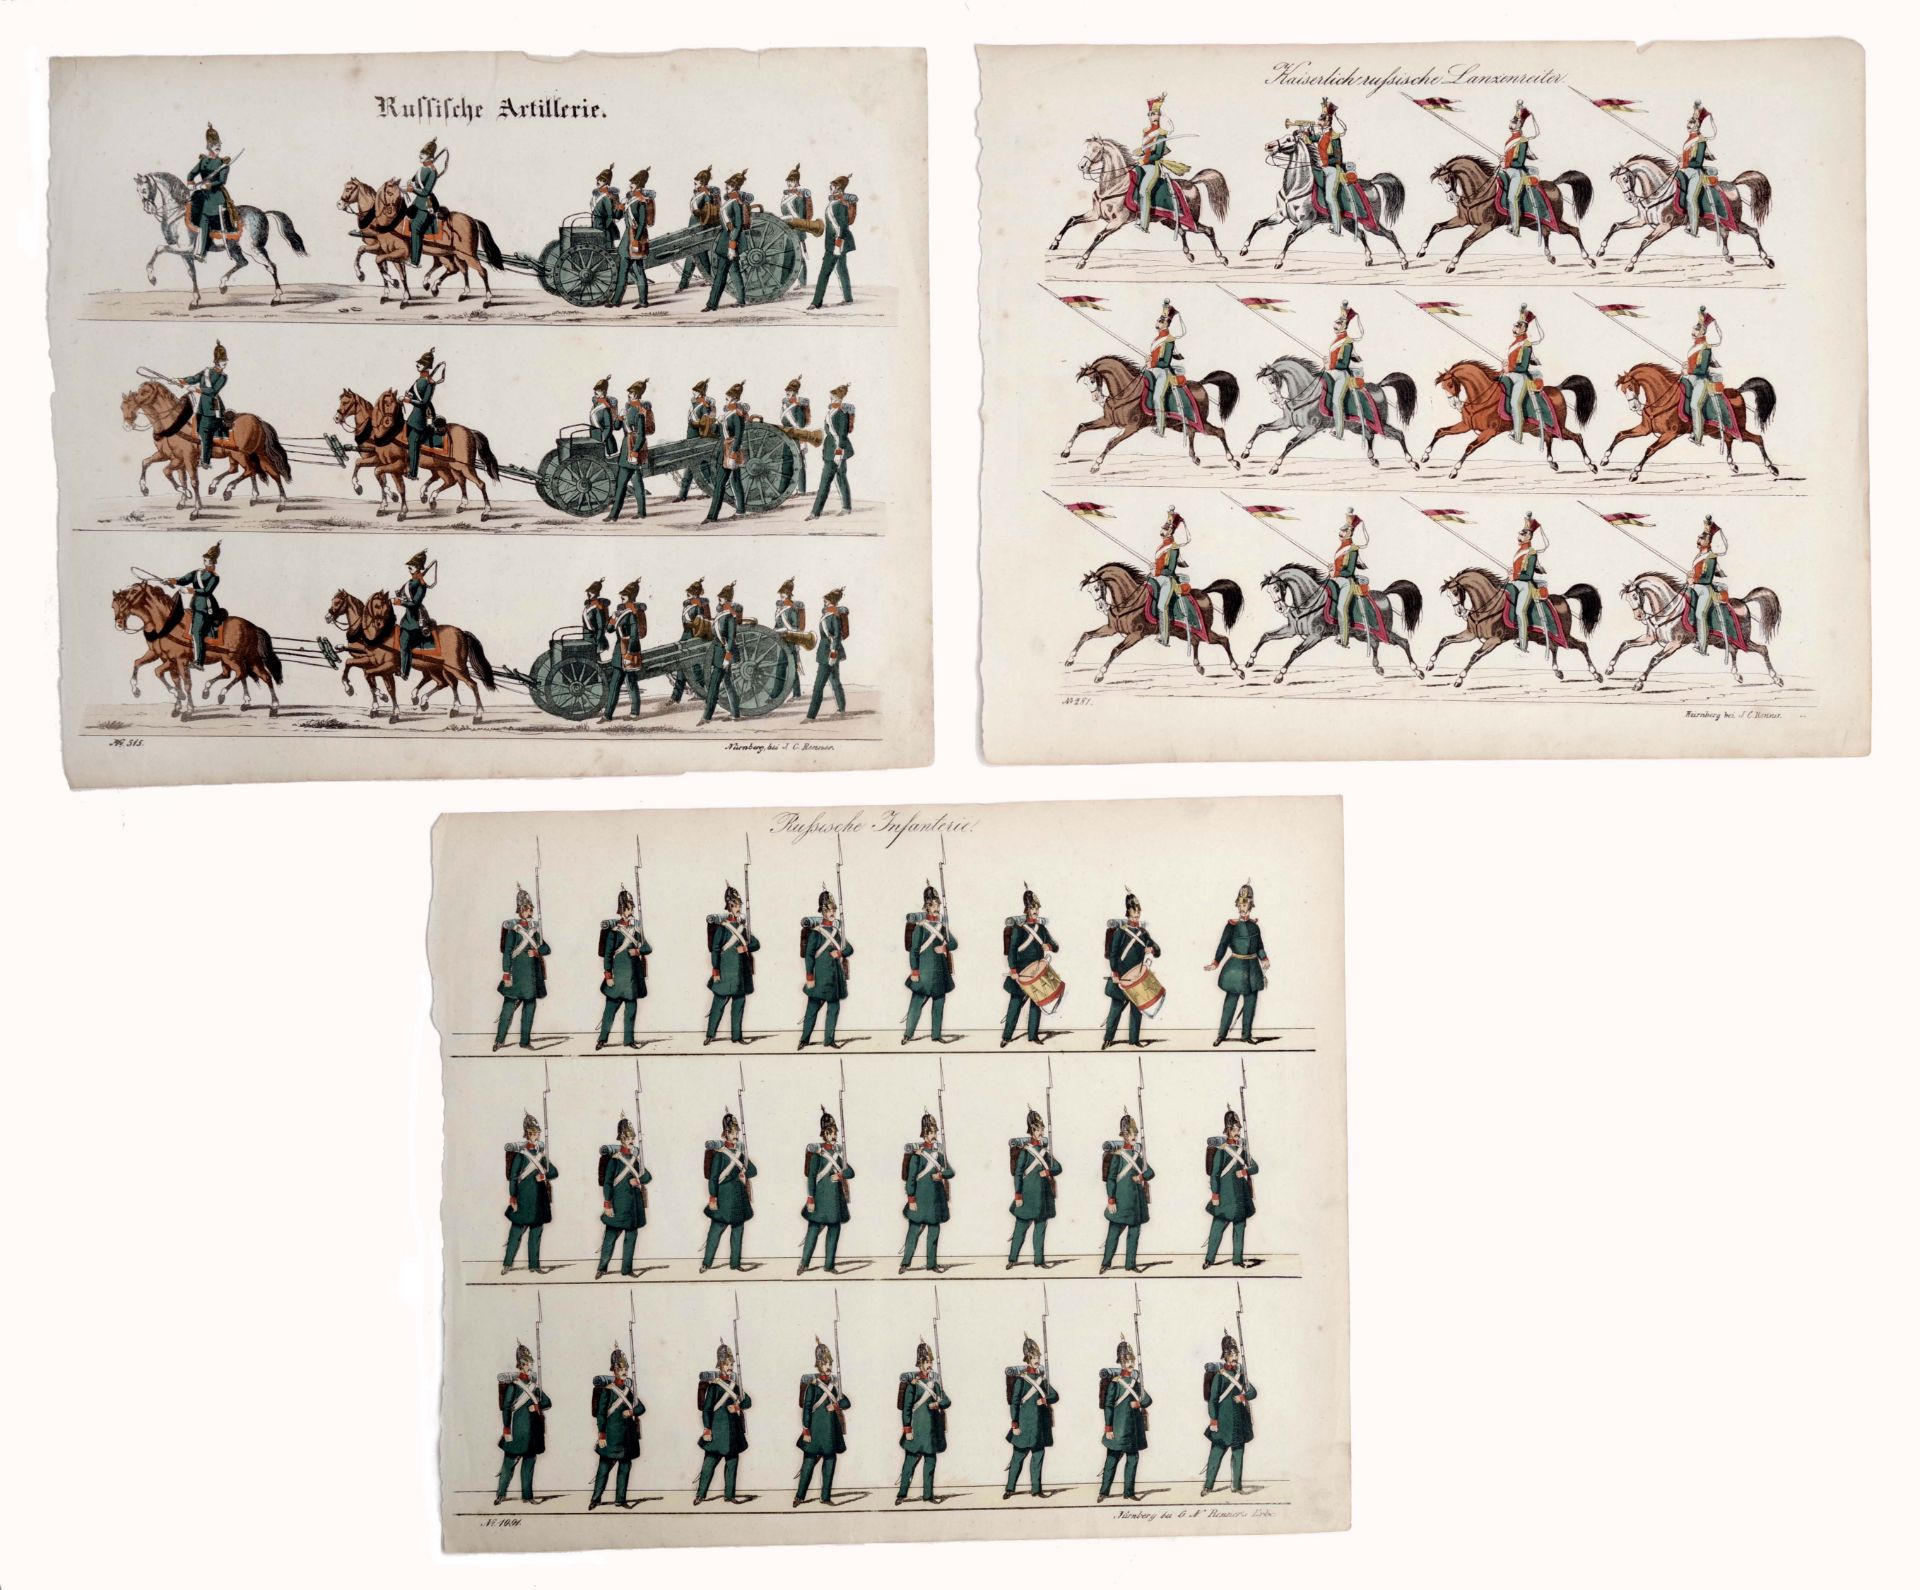 Imperial Russian Lancers (Uhlans)| Infantry and Artillery by J.C. Renner